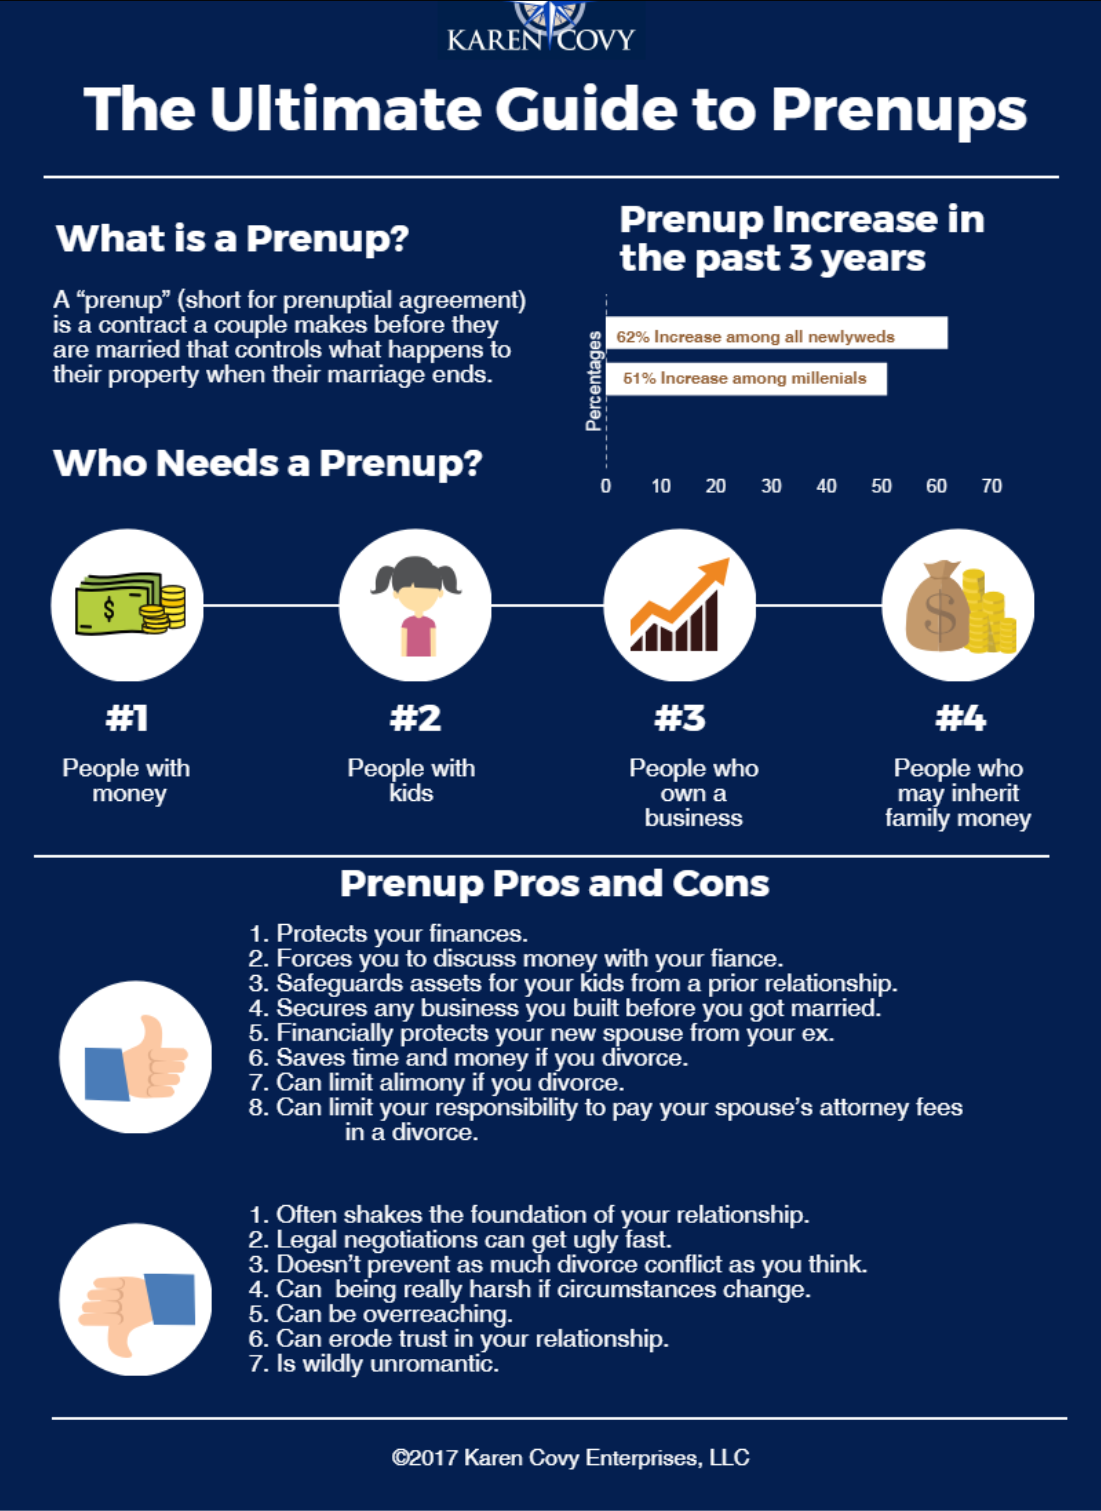 The Ultimate Guide to Prenups: Pros, Cons and How a Prenup Works